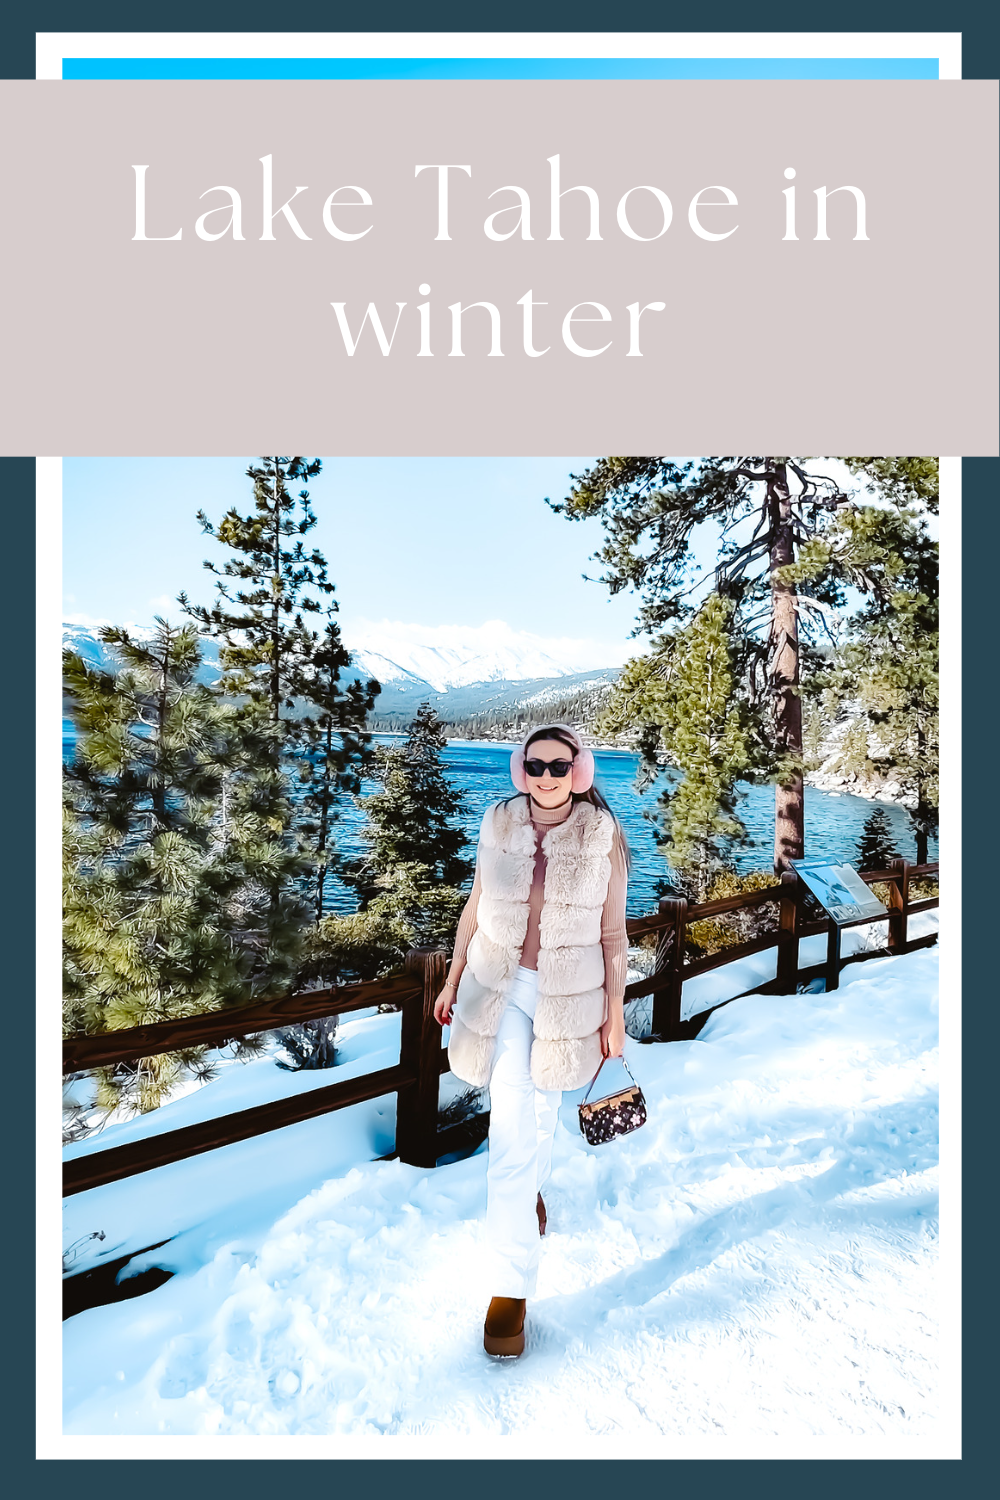 Lake Tahoe in winter by My Next Pin